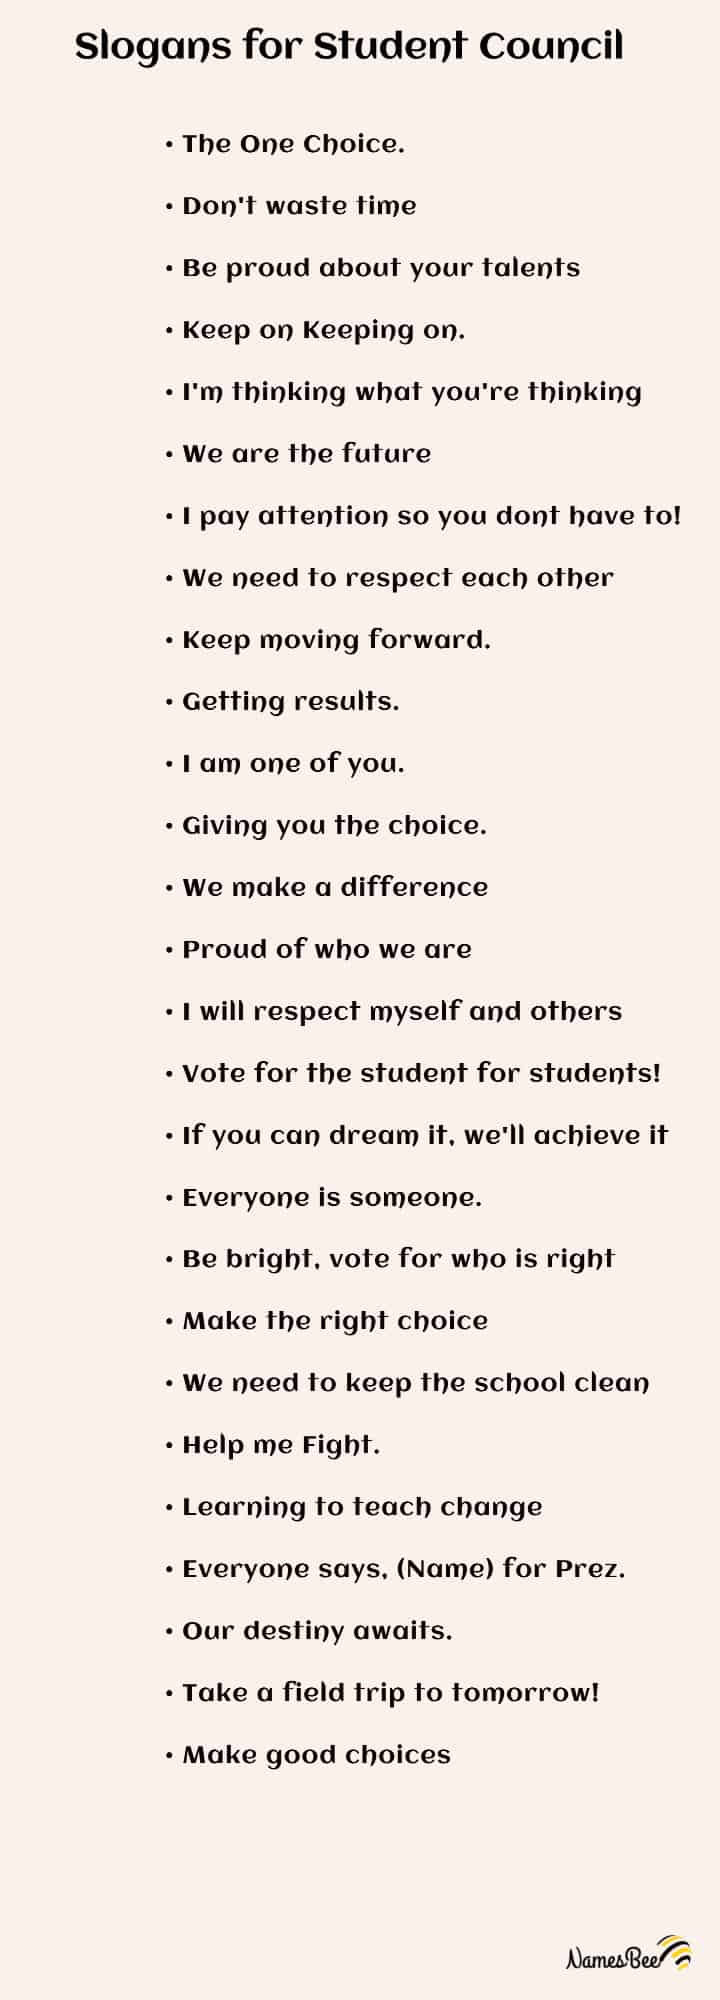 slogans for student council 